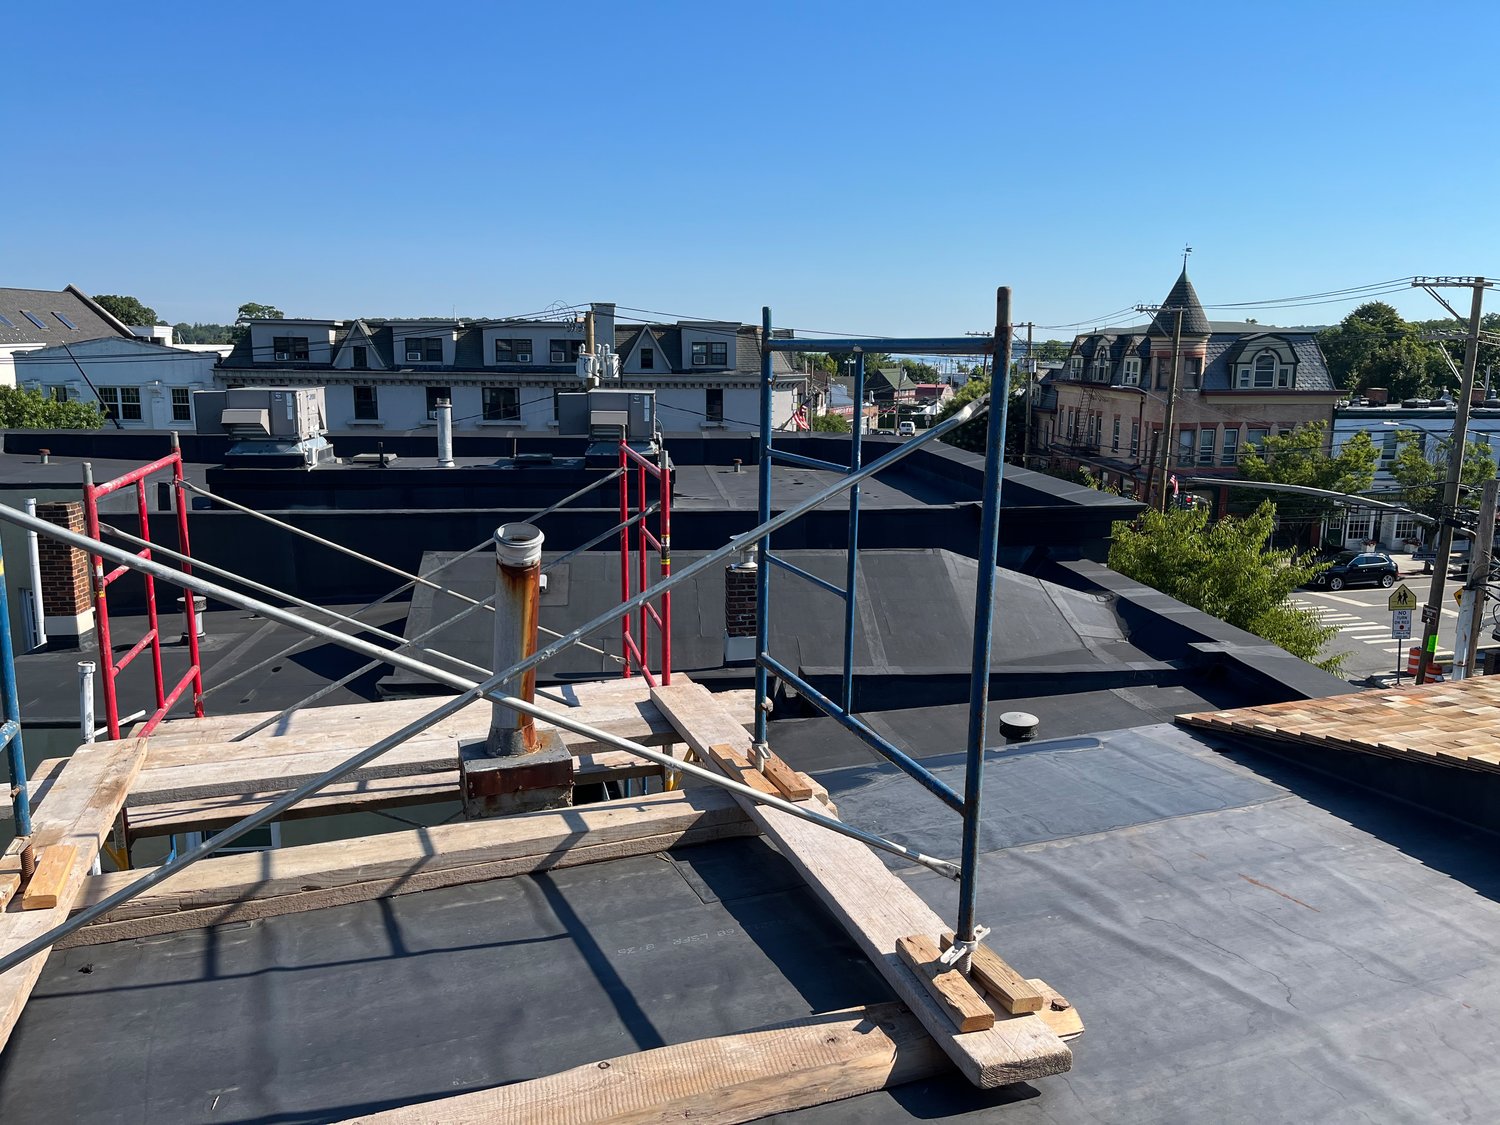 Tenants of the Snouder’s building will have access to the rooftop, giving them a unique view of the historic hamlet.